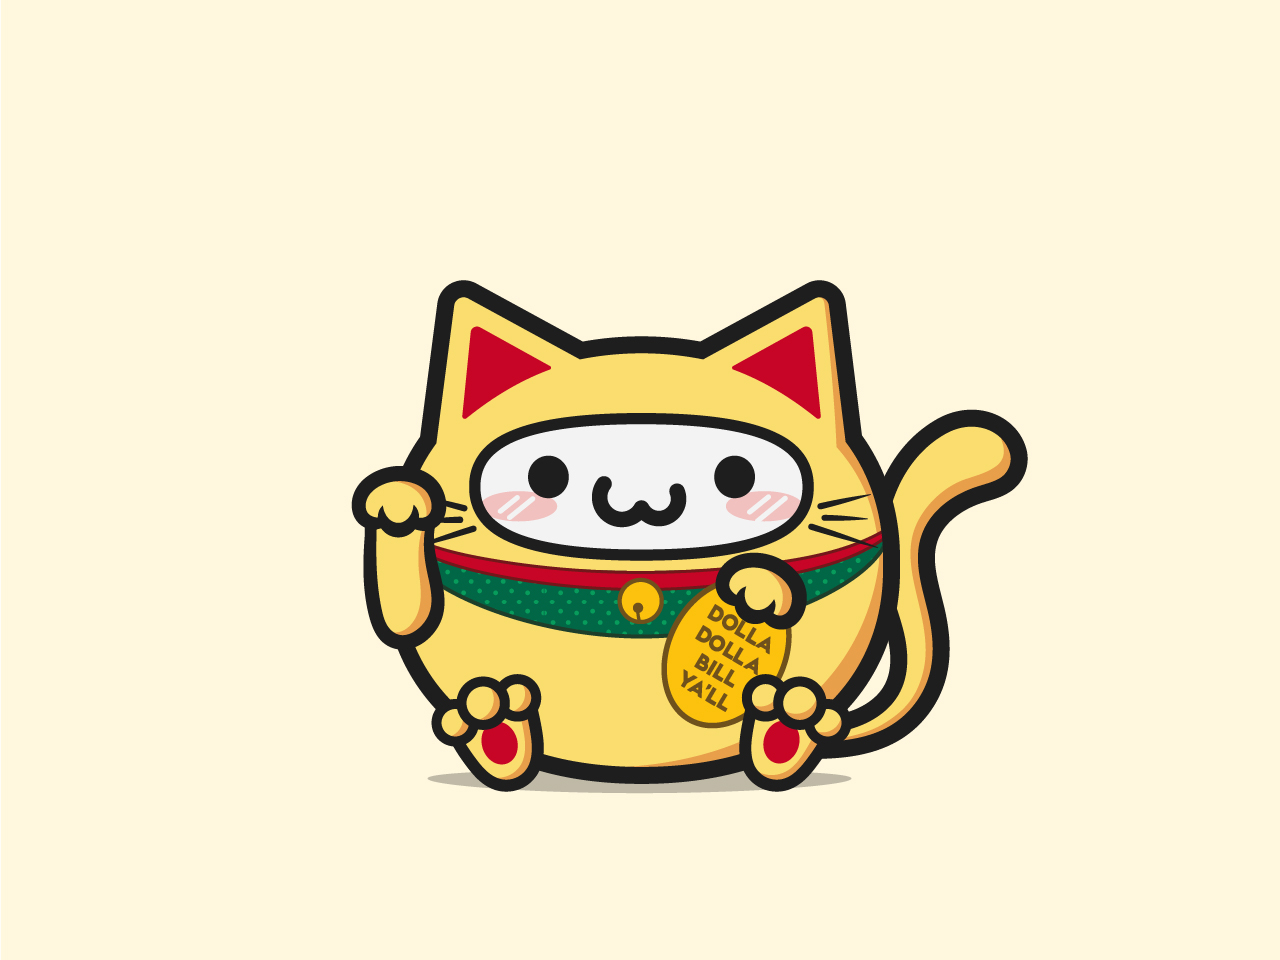 KHAB Character in Chinese lucky cat costume by Ioana Ionescu on Dribbble